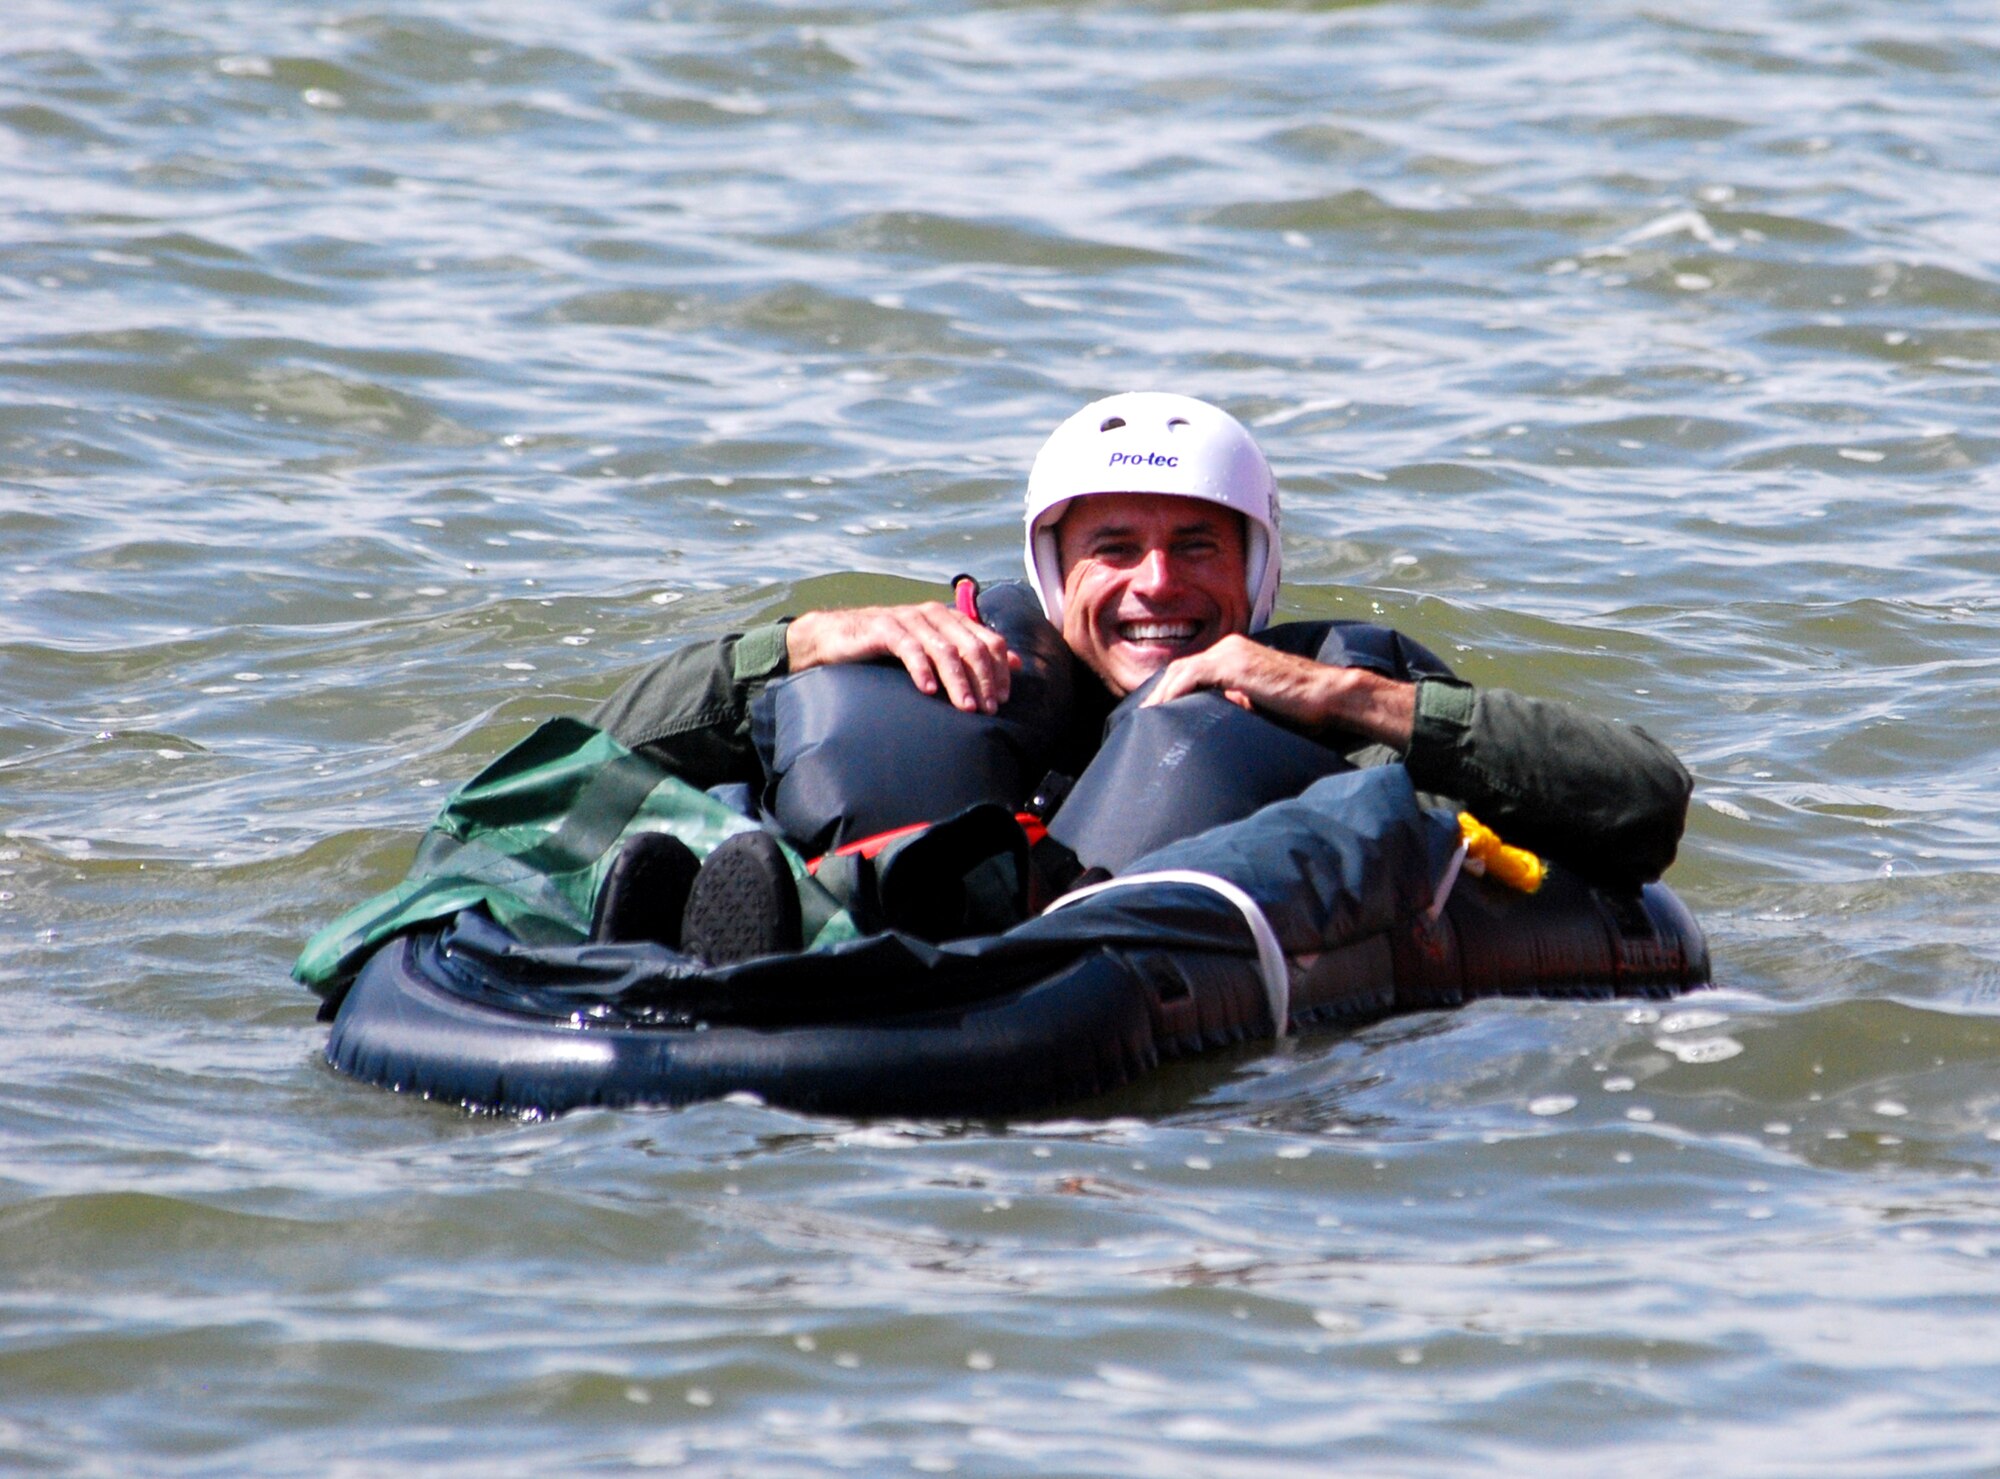 Pilots from the 457th Fighter Squadron recently endured their annual water survival training conducted at Lake Worth in Fort Worth, Texas. Col. Kevin Pottinger, 301st Fighter Wing commander and F-16 pilot, enjoys a moment from training and the hot Texas weather to float in an individual raft used for pilot water safety. (U.S. Air Force Photo/Tech. Sgt. Julie Briden-Garcia)